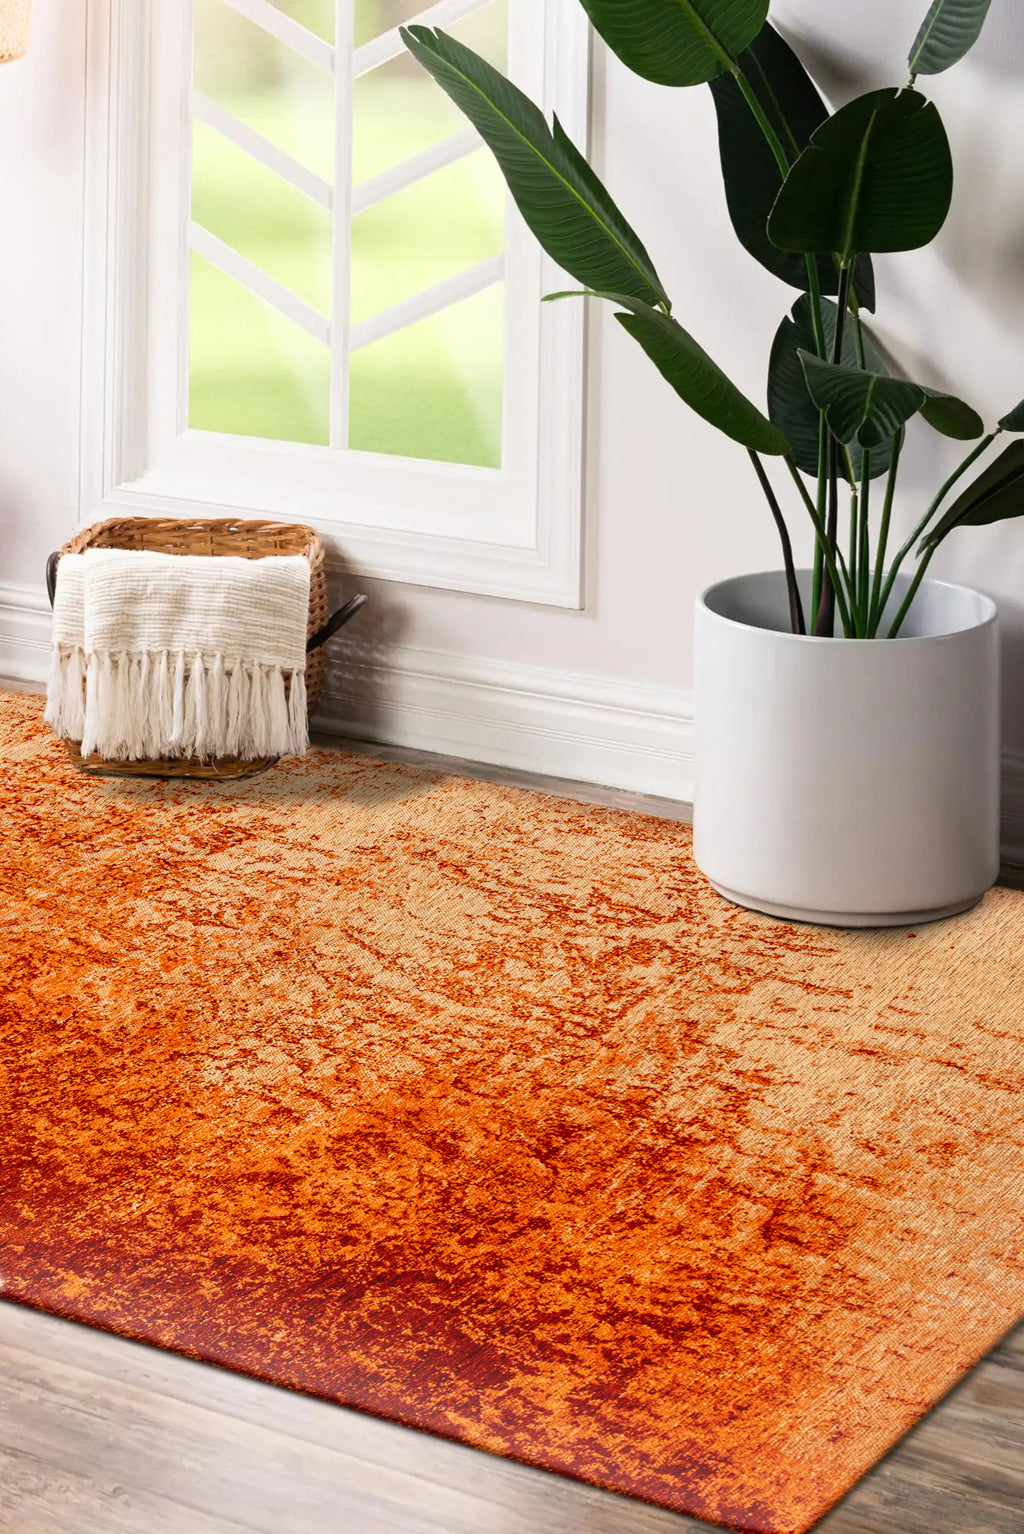 TAPIS - COLLECTION REFLECT BENEFFITO